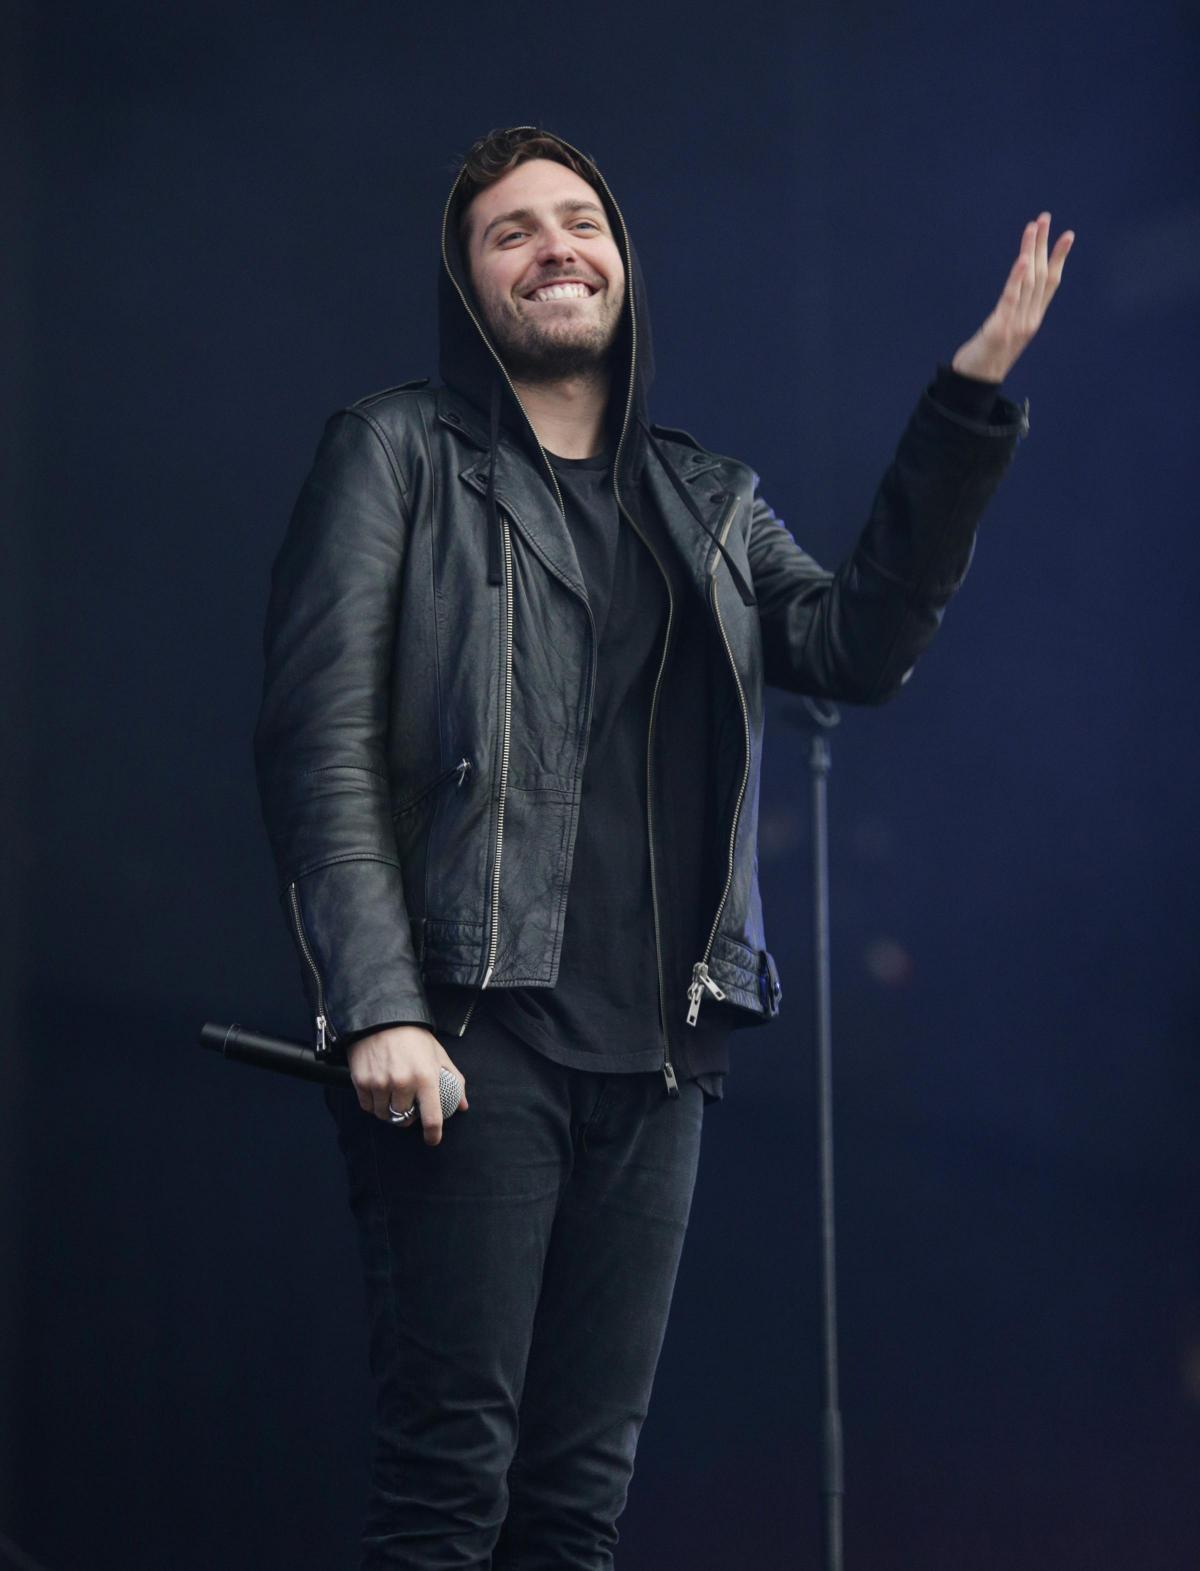 Isle of Wight Festival 2015 - Friday